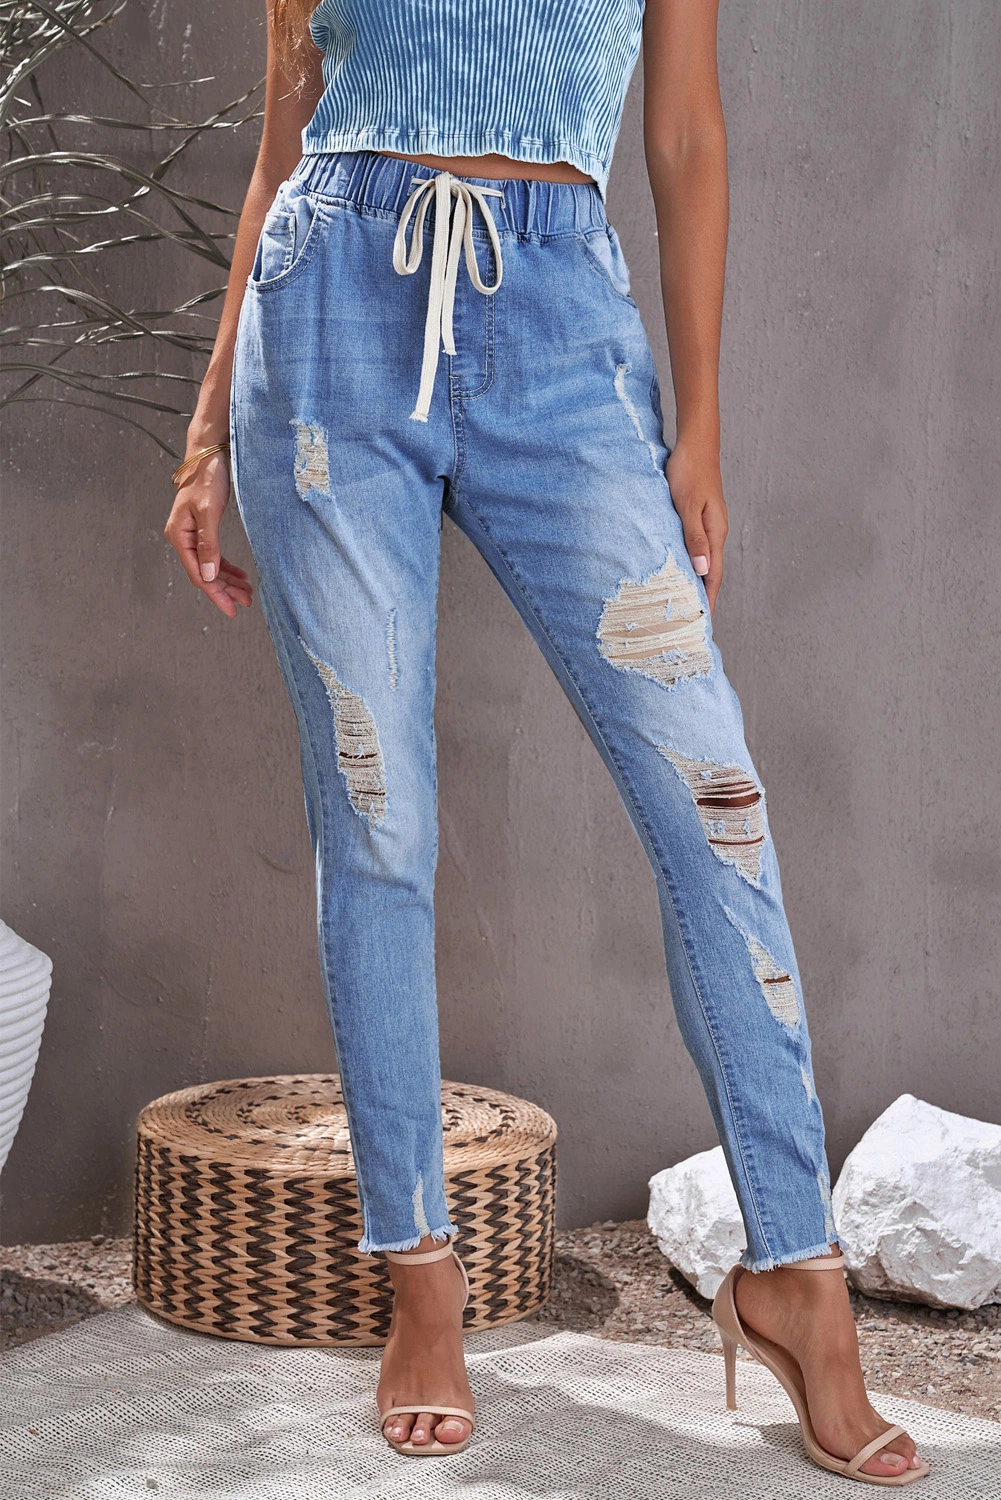 Dear-Lover Blank Apparel Wholesale Western Clothing New Blue Ripped Baggy Distressed Pants Trousers Ladies Torn Hole Stretch Women Denim Women′s Jeans